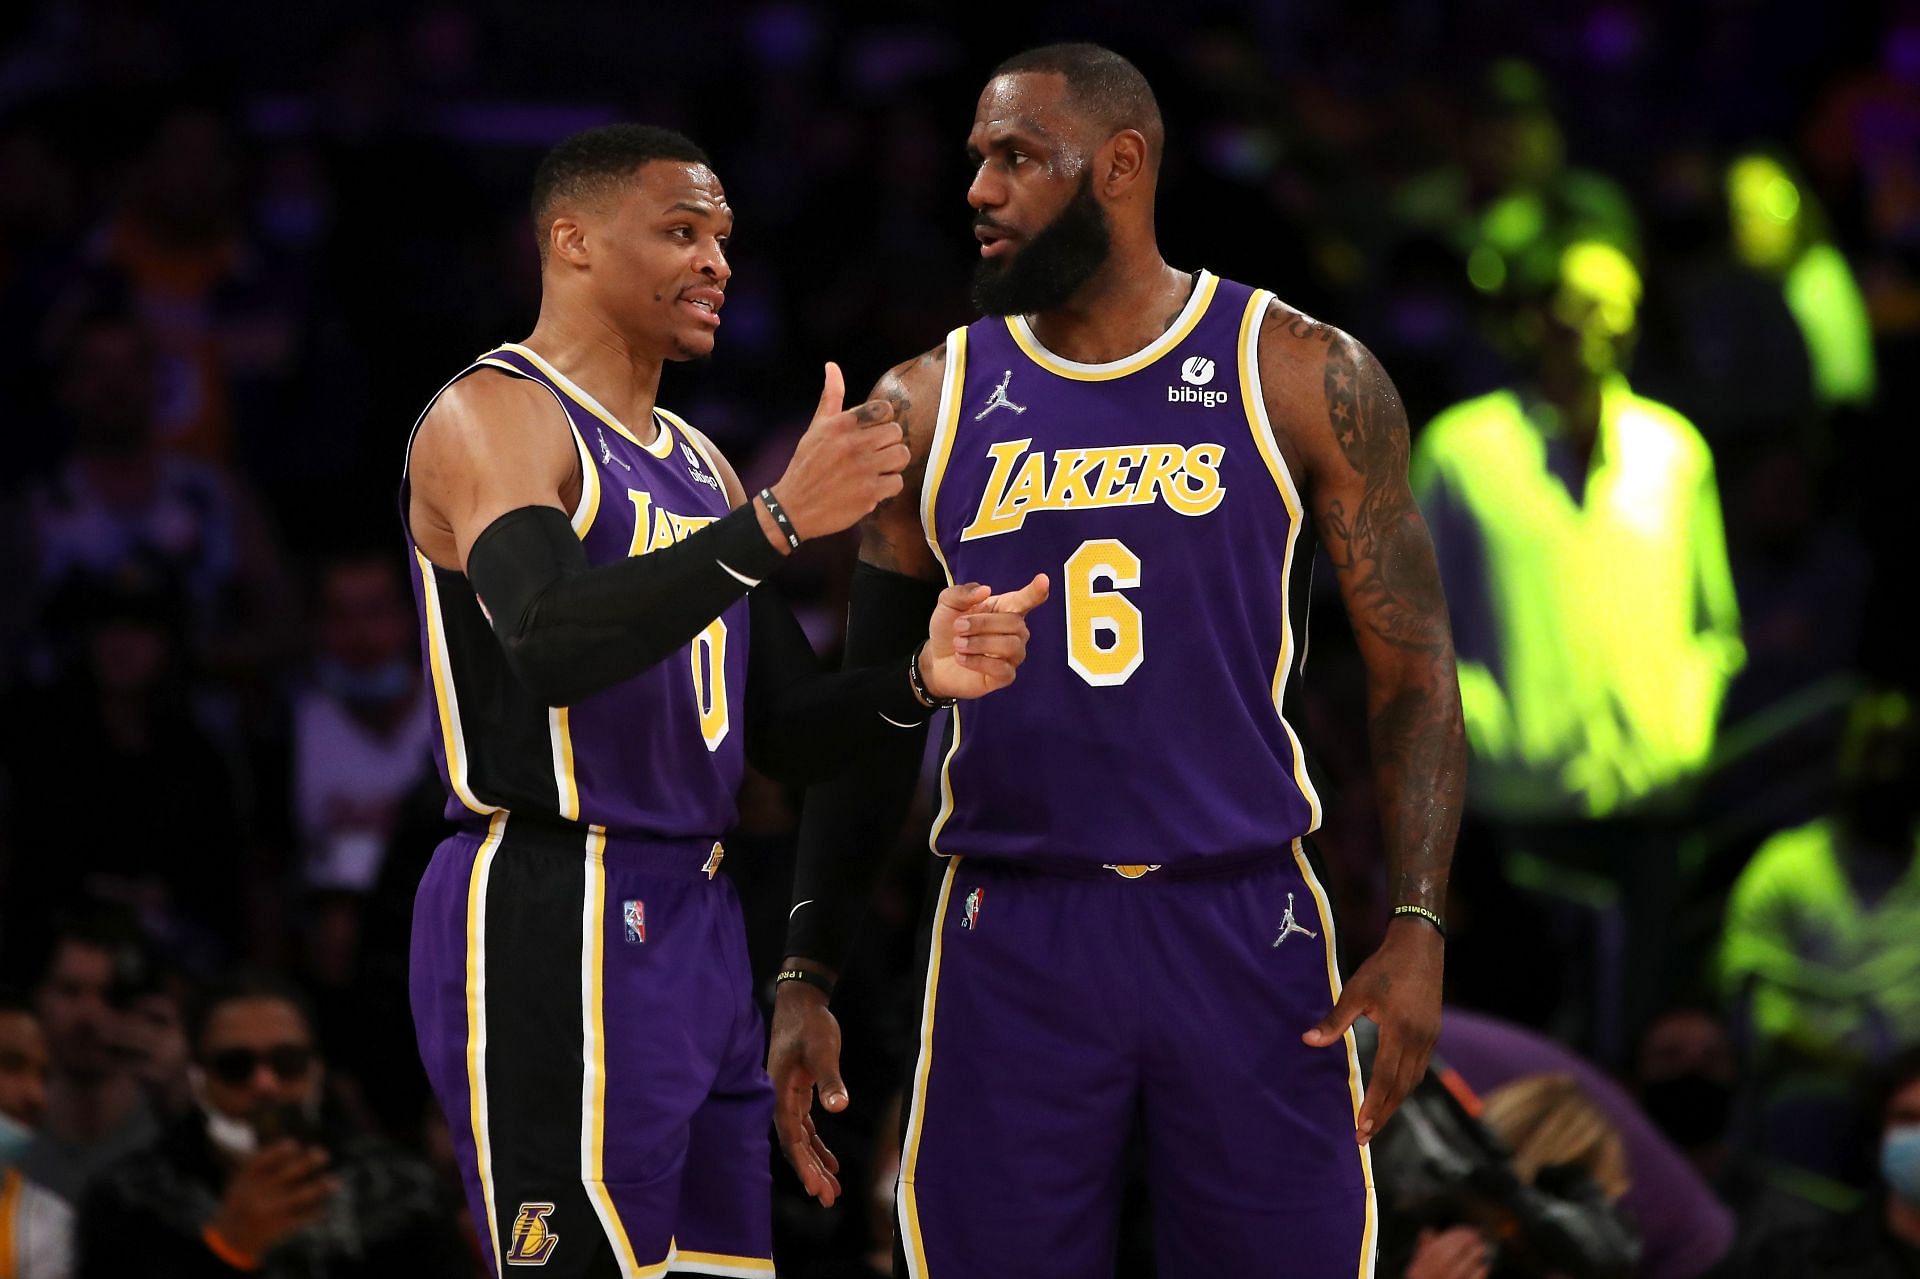 Russell Westbrook, left, and LeBron James of the LA Lakers